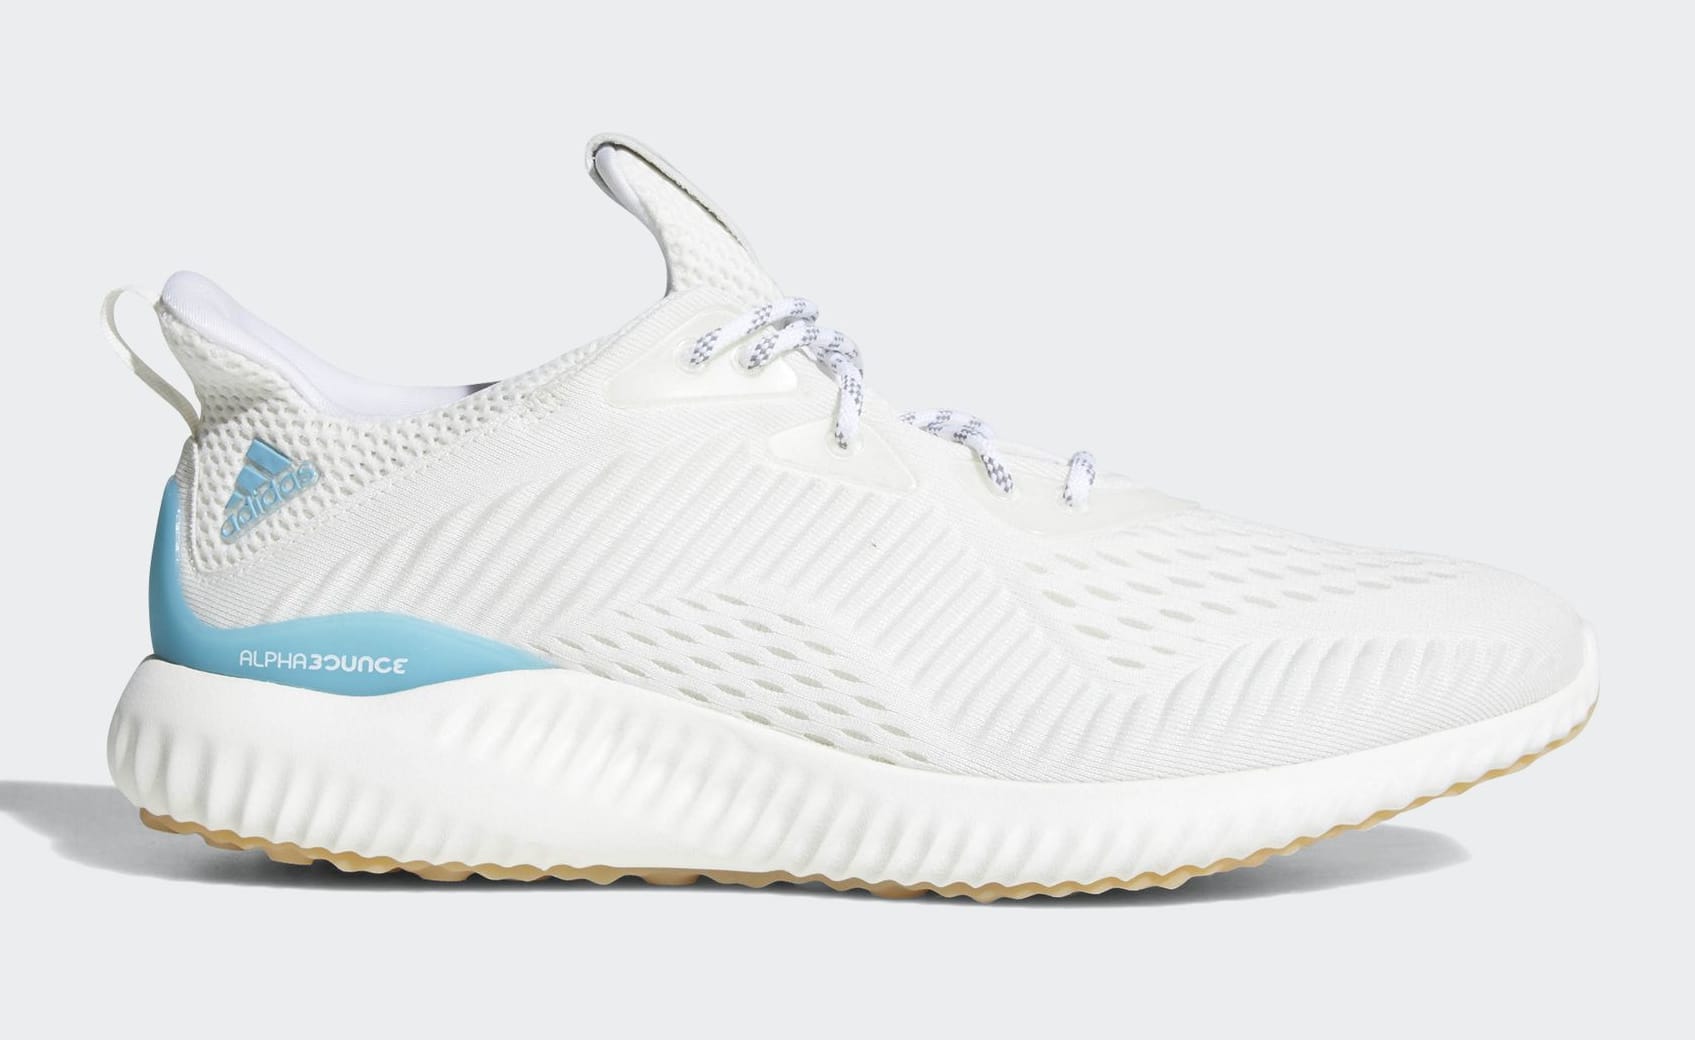 Parley x Adidas Alphabounce CQ0784 (Lateral)